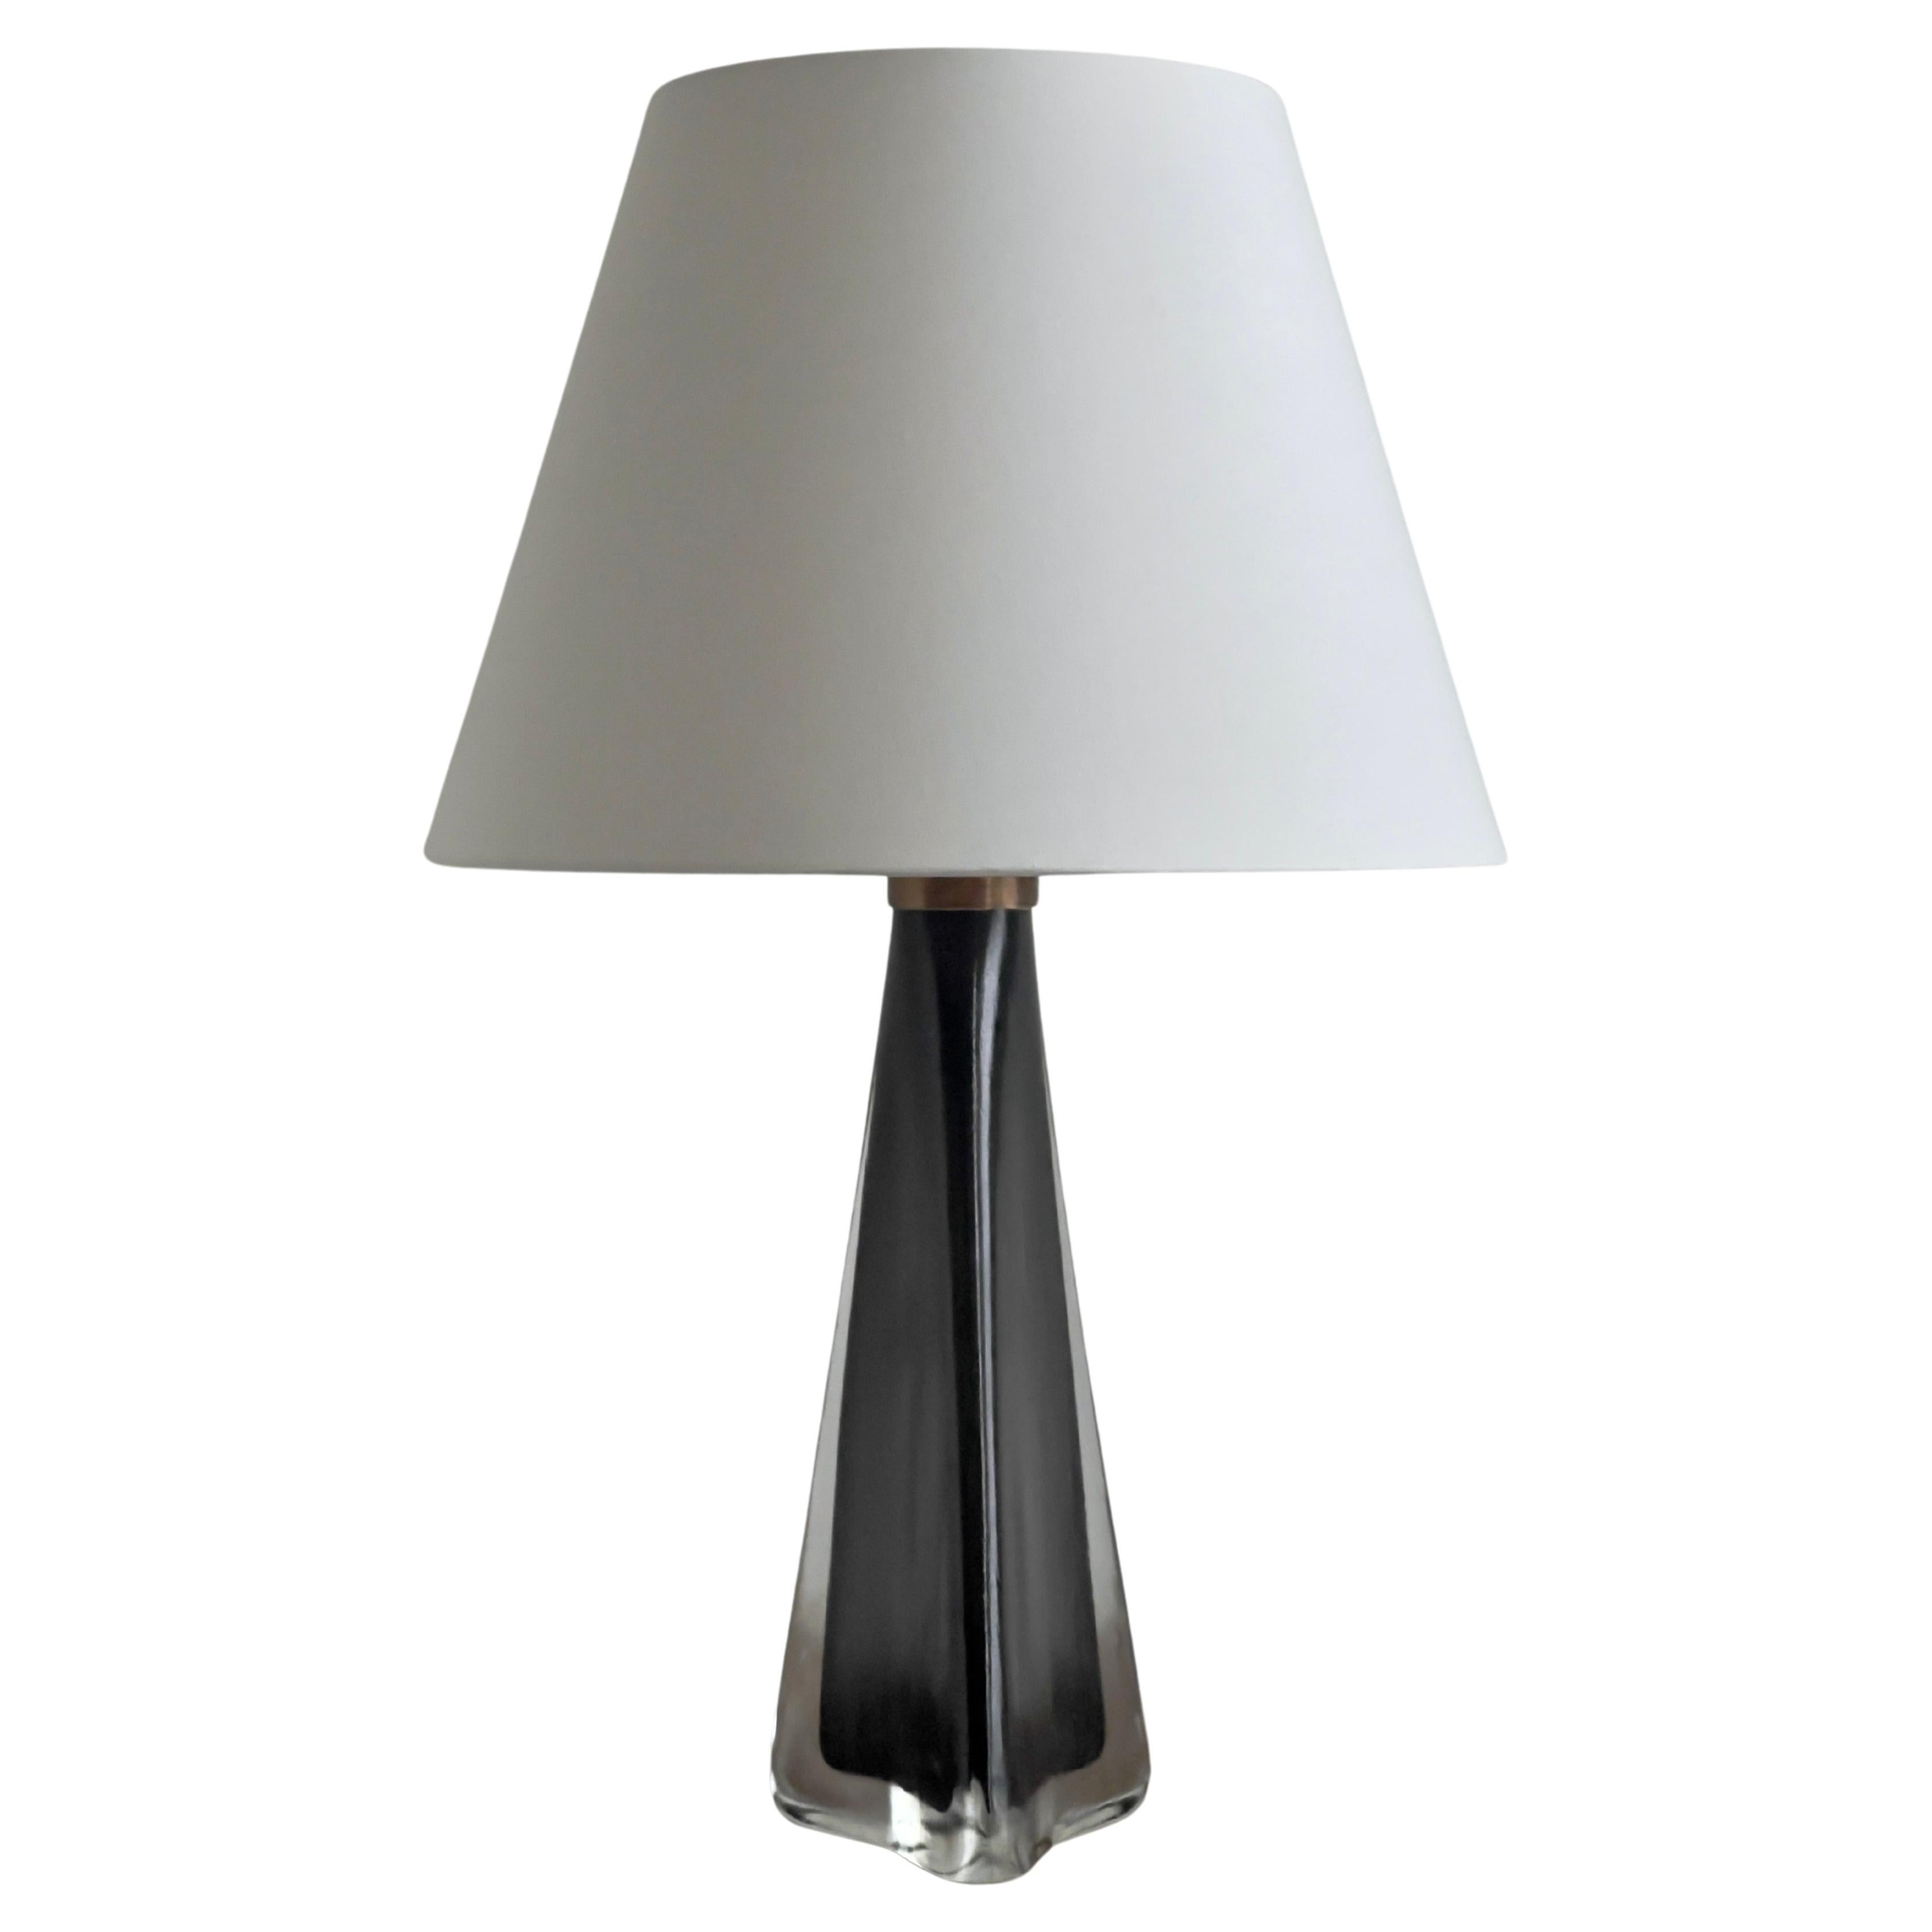 Large table lamp by Carl Fagerlund for Orrefors in black and clear frosted glass